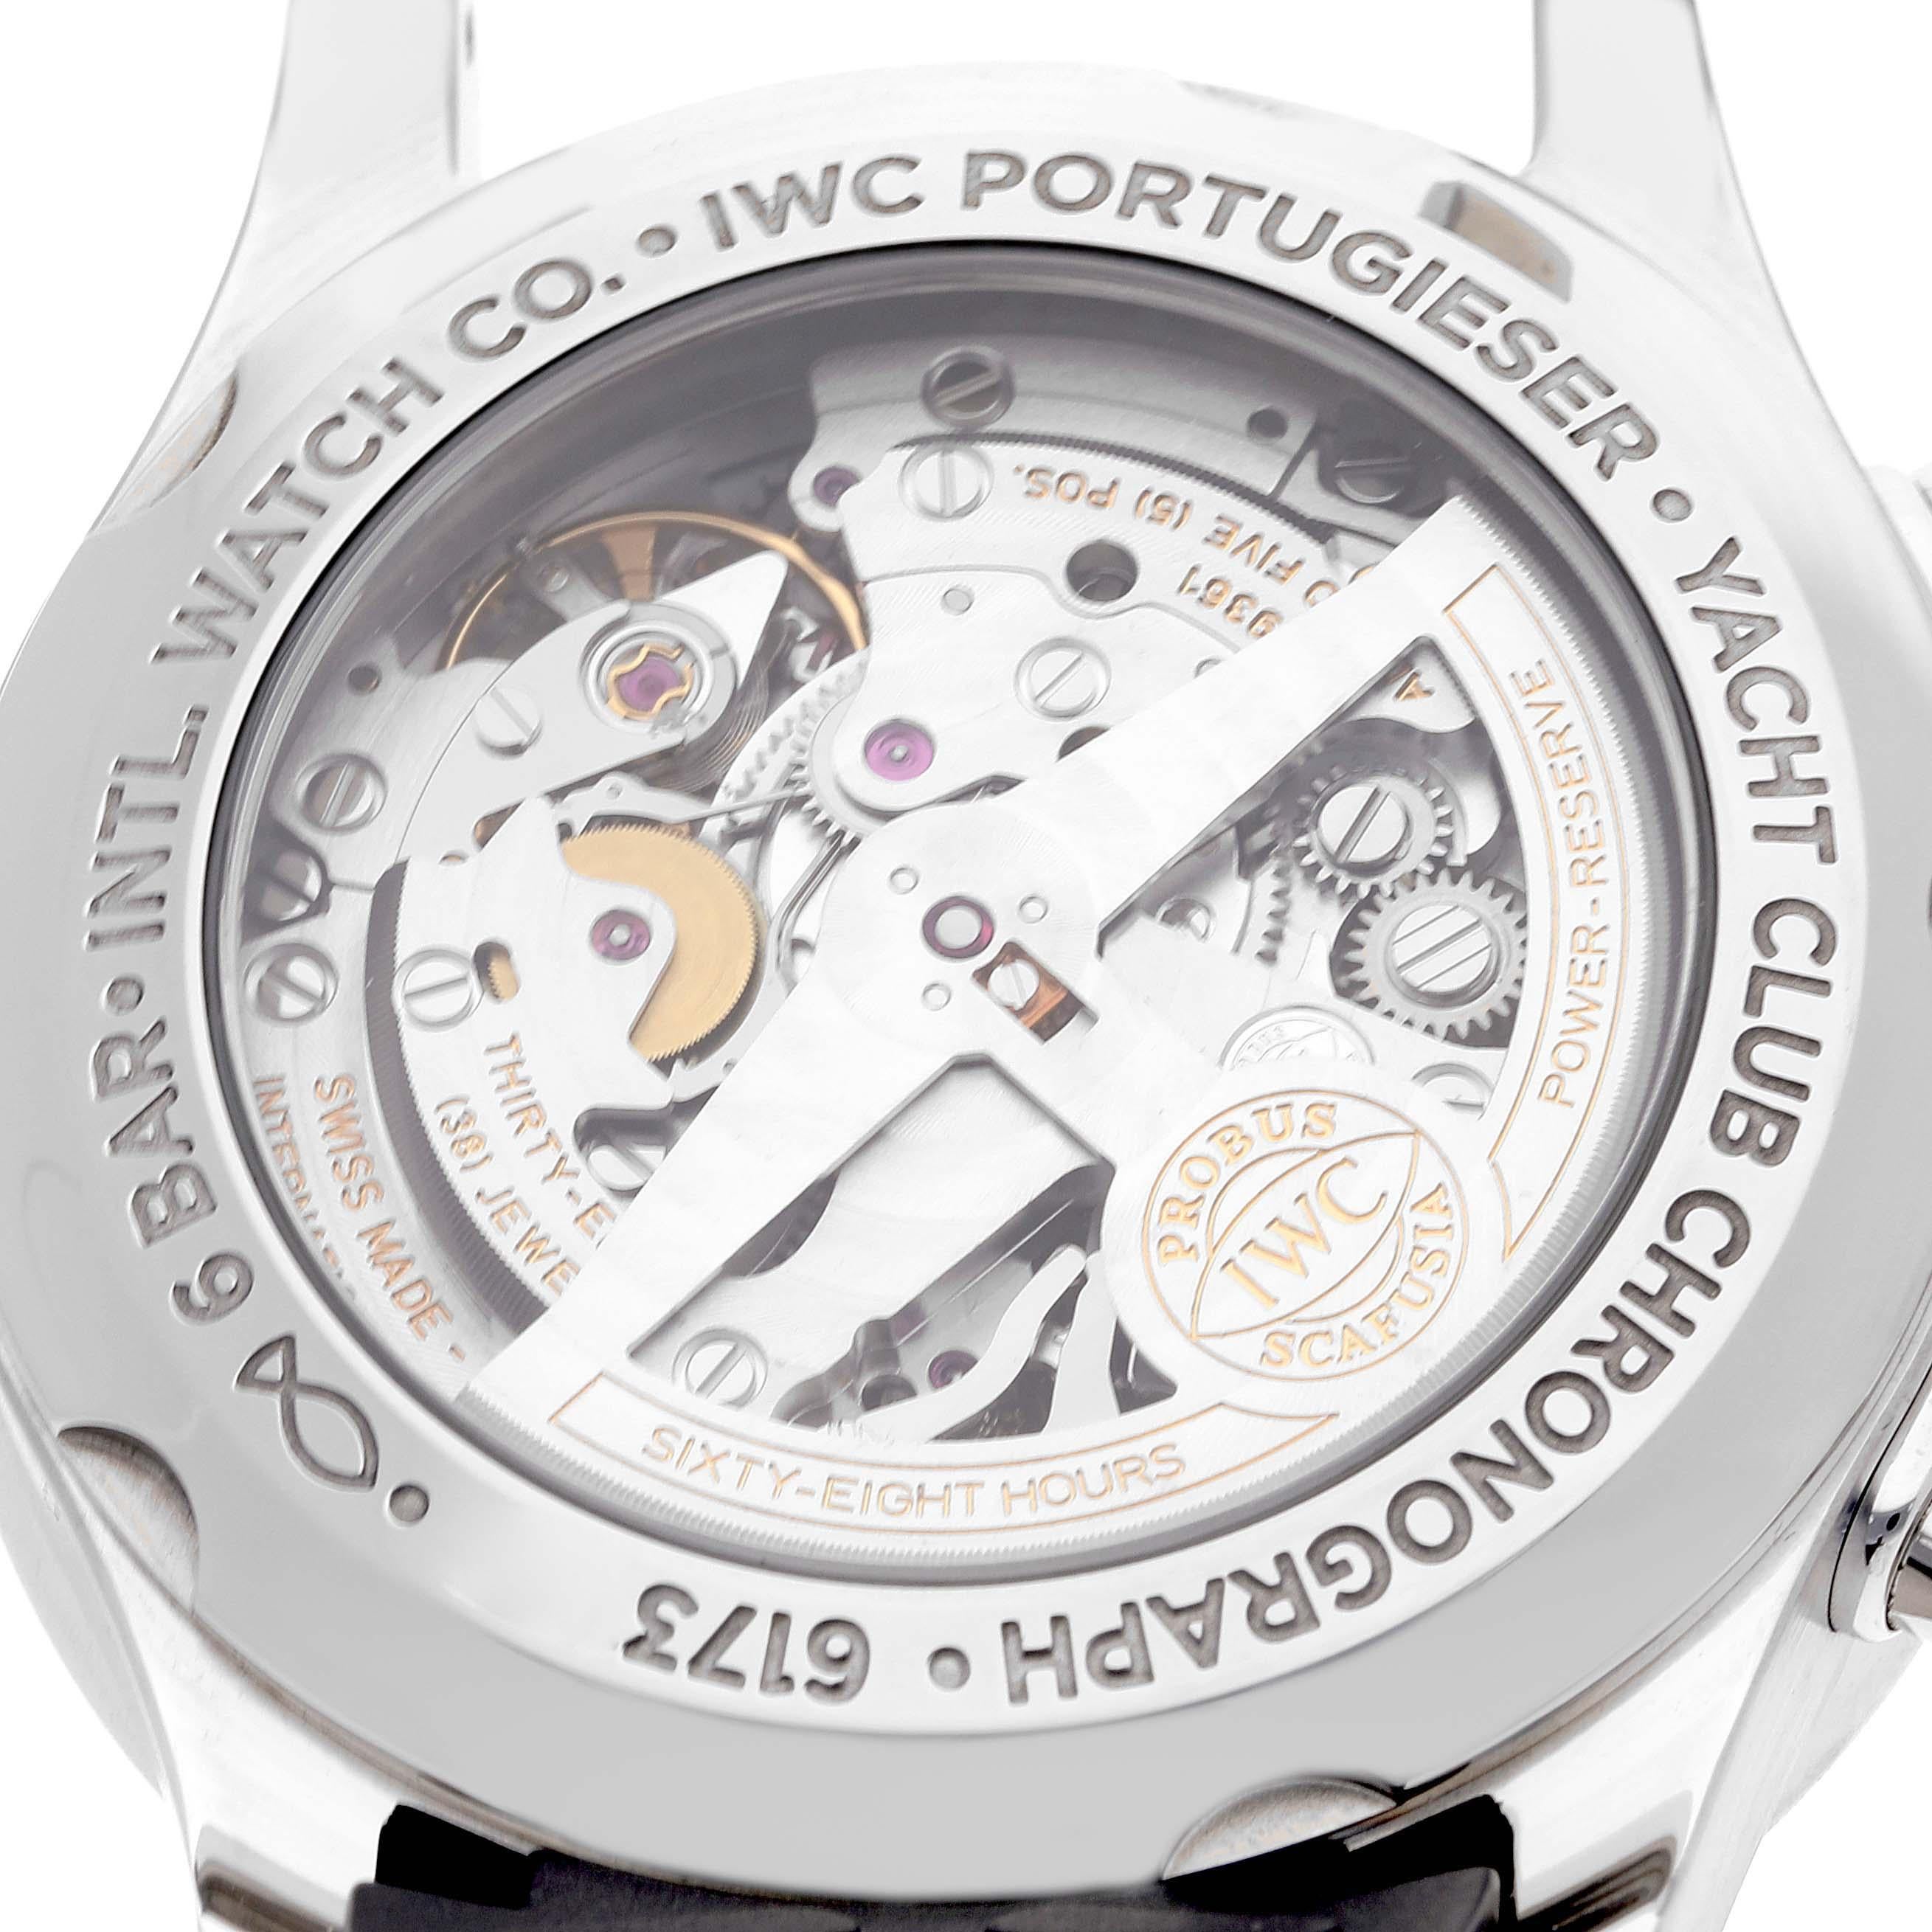 IWC Portuguese Yacht Club Chronograph Steel Mens Watch IW390502 Box Card. Automatic self-winding movement. Stainless steel case 43.5 mm in diameter. Transparent exhibition sapphire crystal caseback. . Scratch resistant sapphire crystal. Silver dial